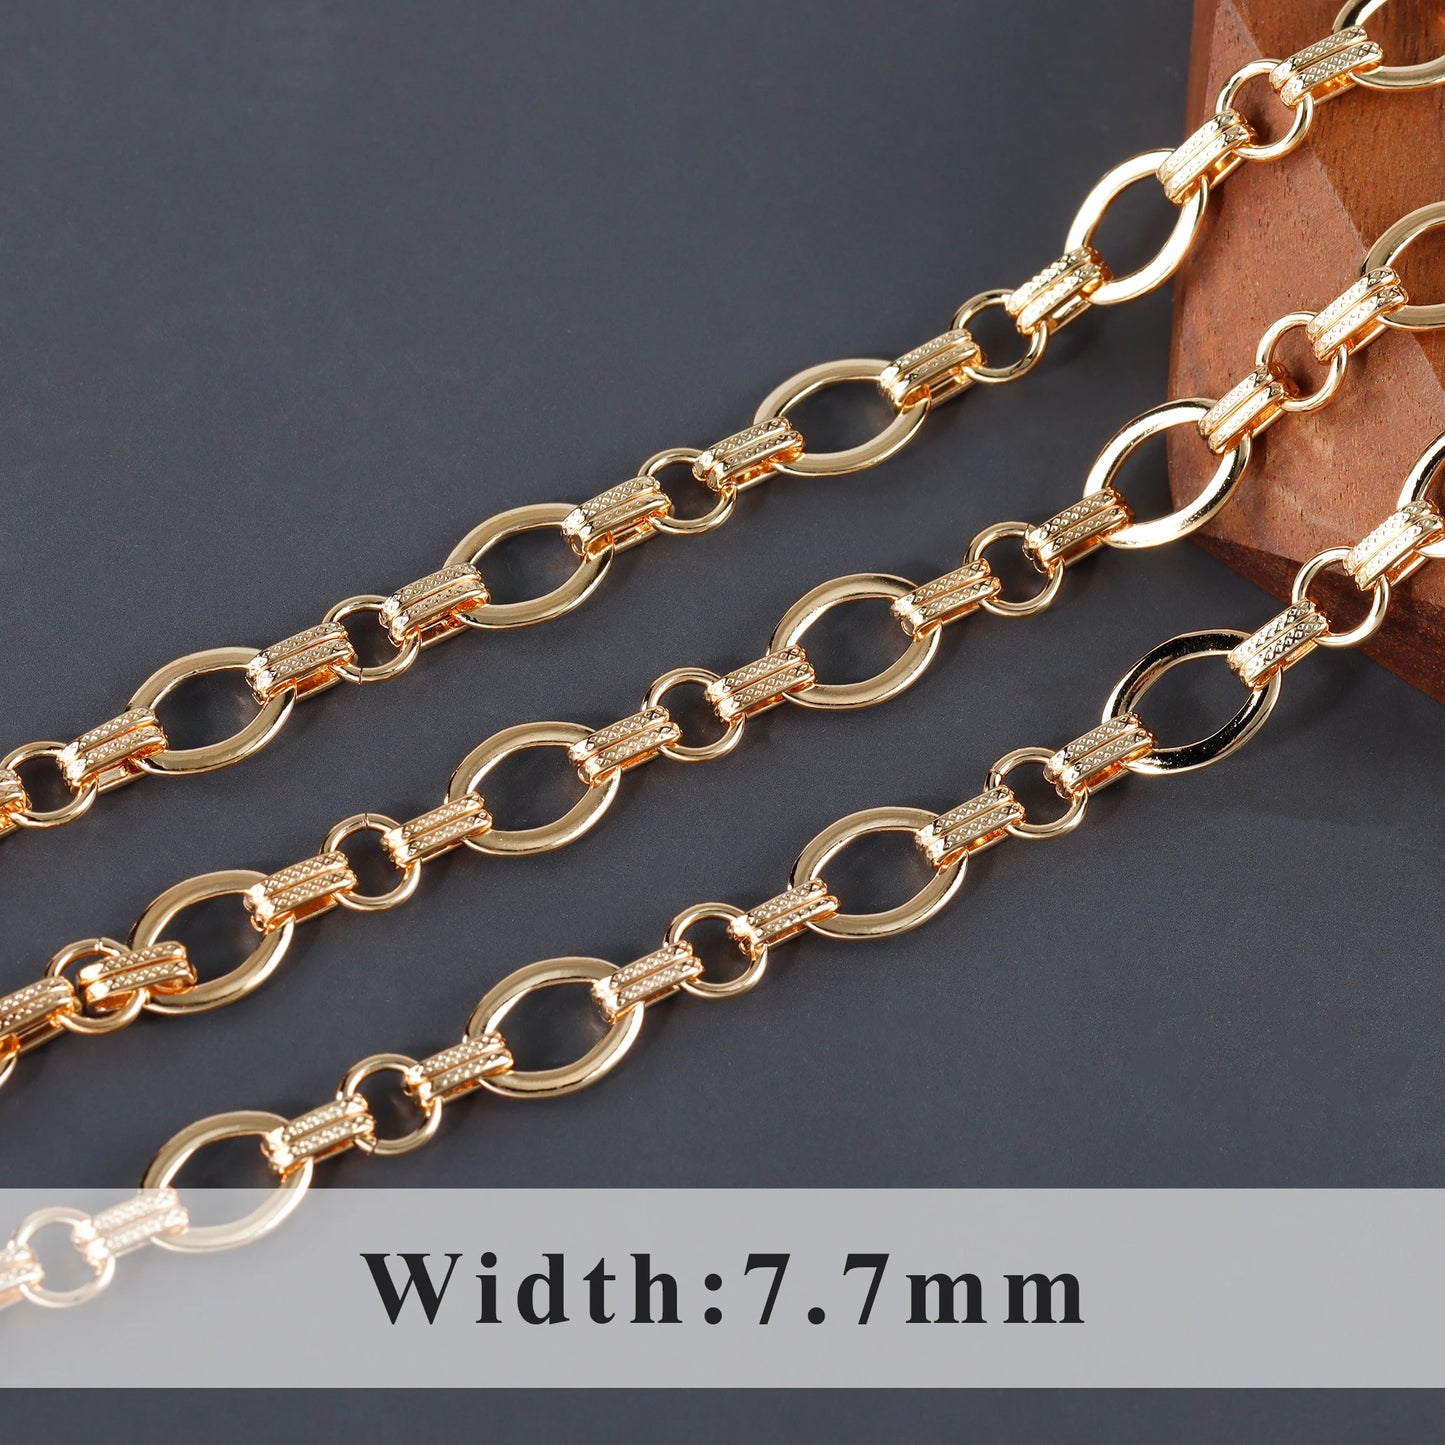 GUFEATHER C202,diy chain,pass REACH,nickel free,18k gold plated,copper,diy bracelet necklace,hand made,jewelry making,1m/lot